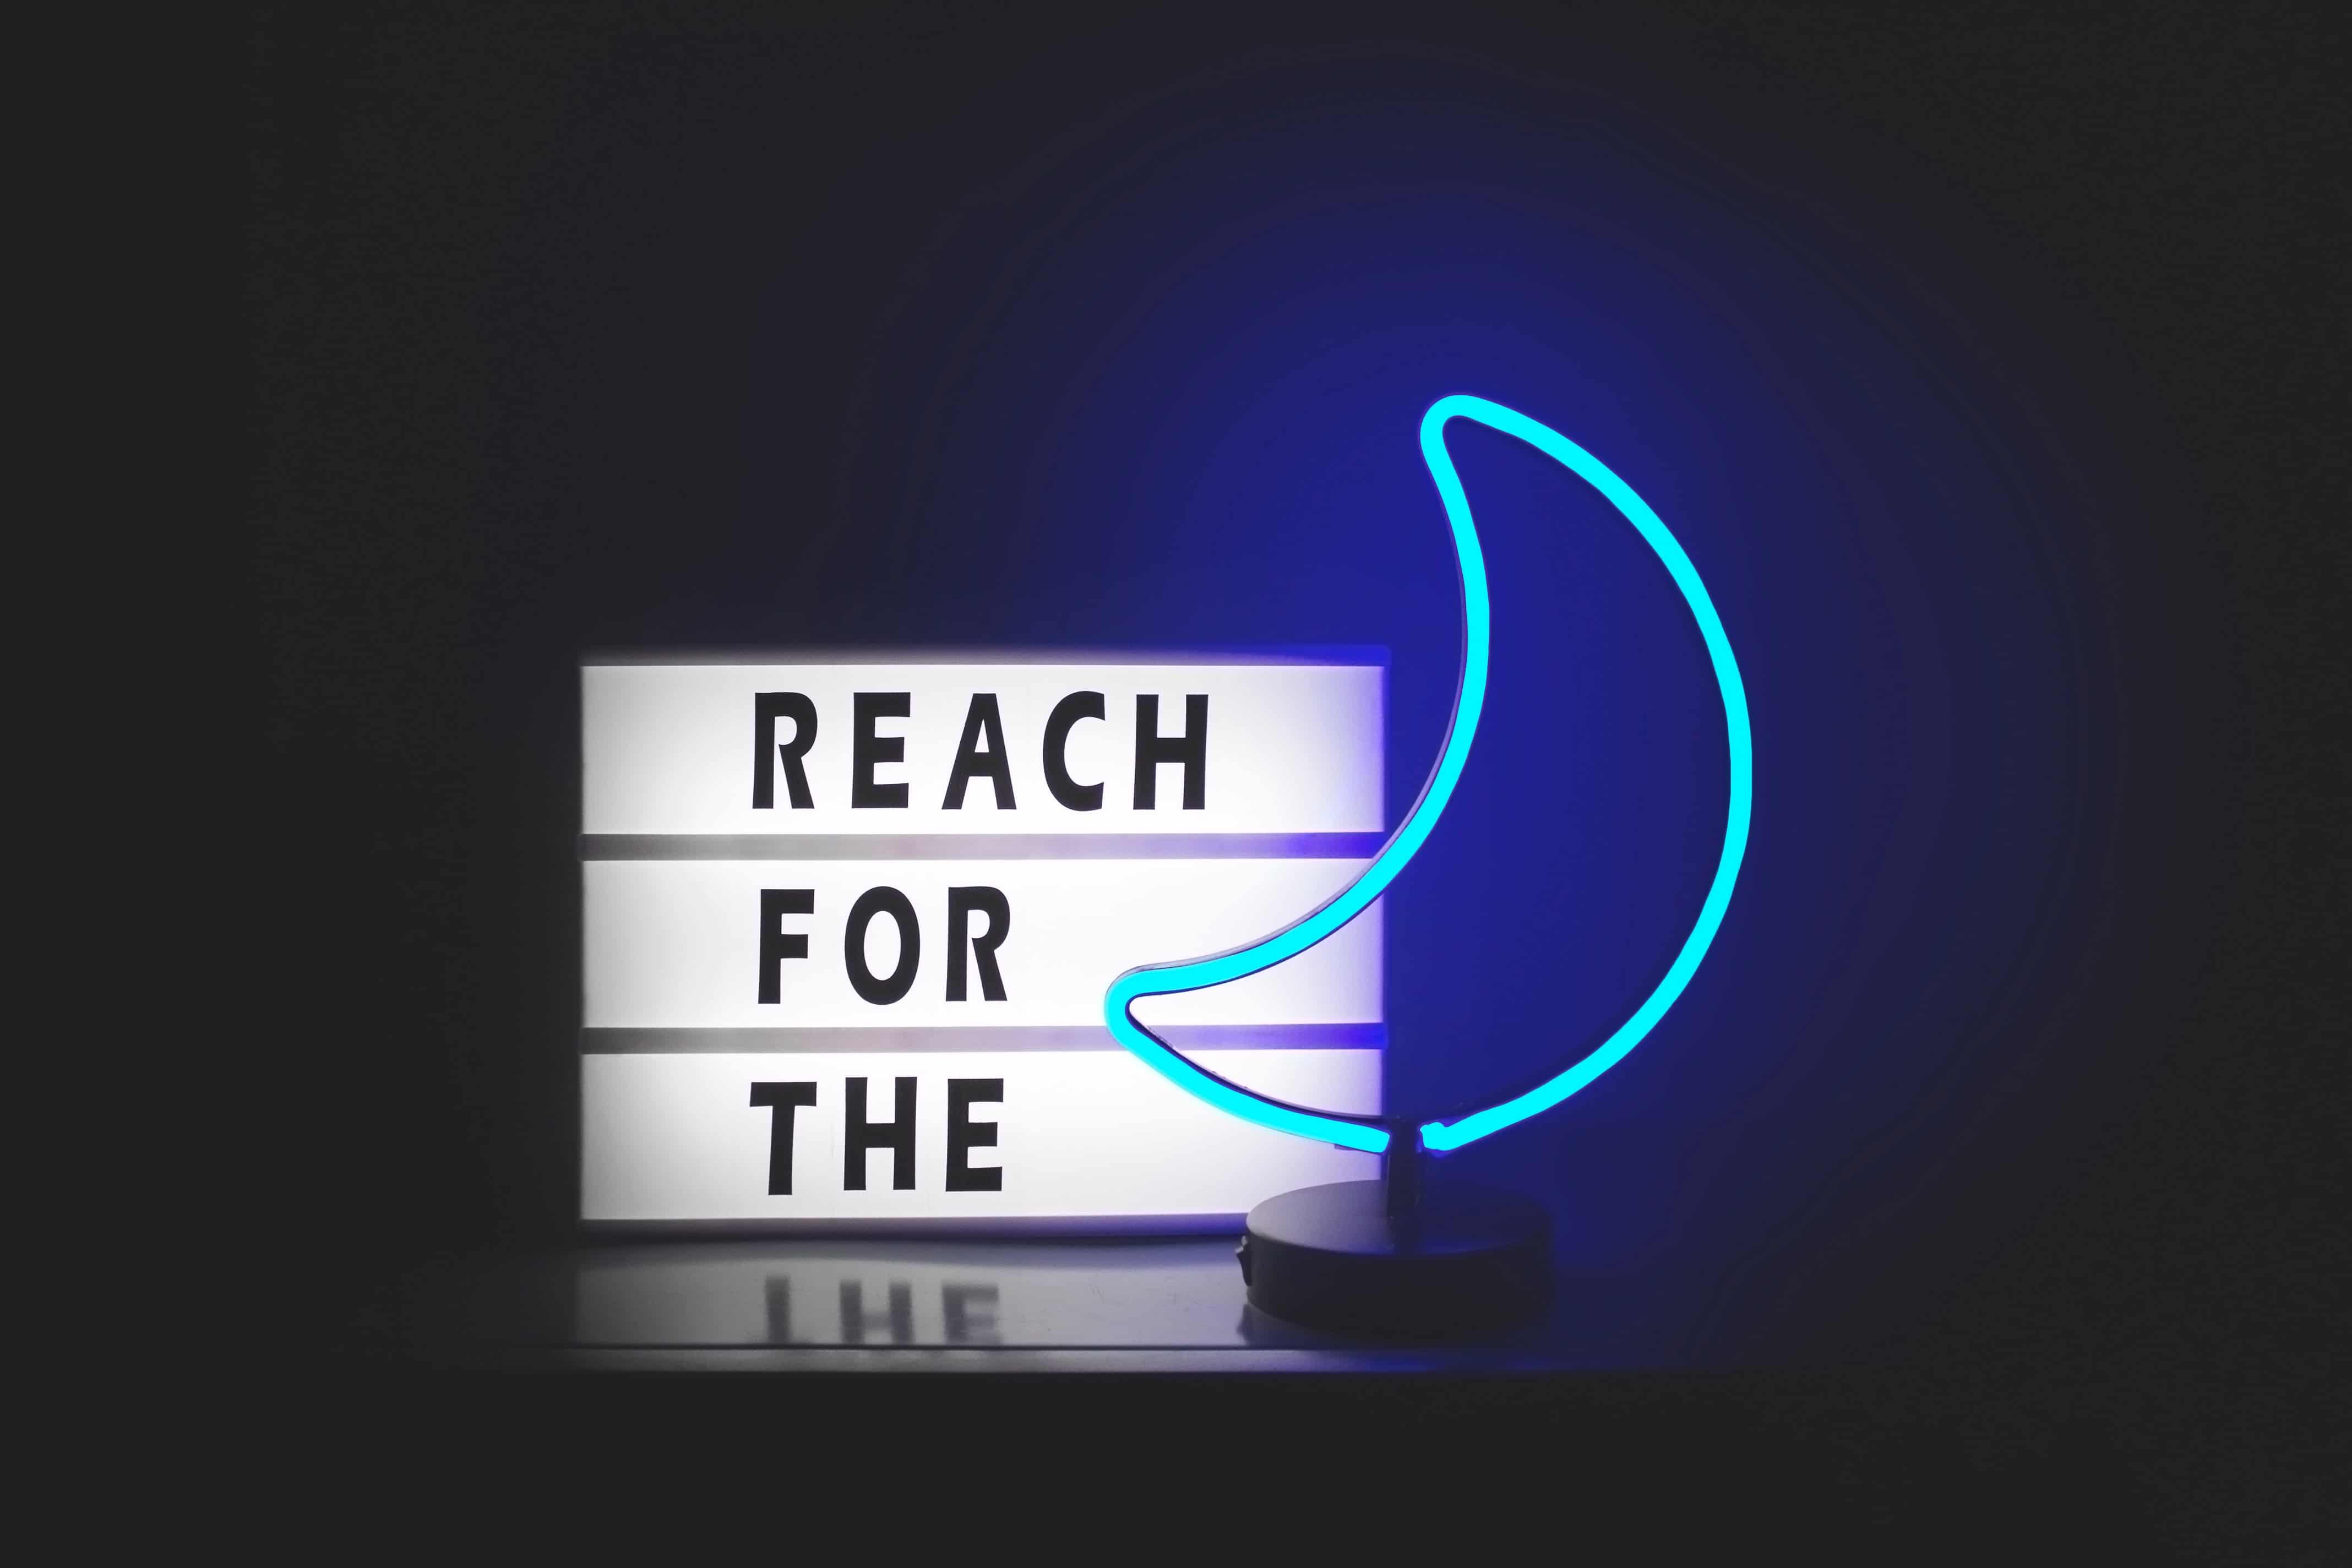 A neon blue moon next to a sign that says 'reach for the'